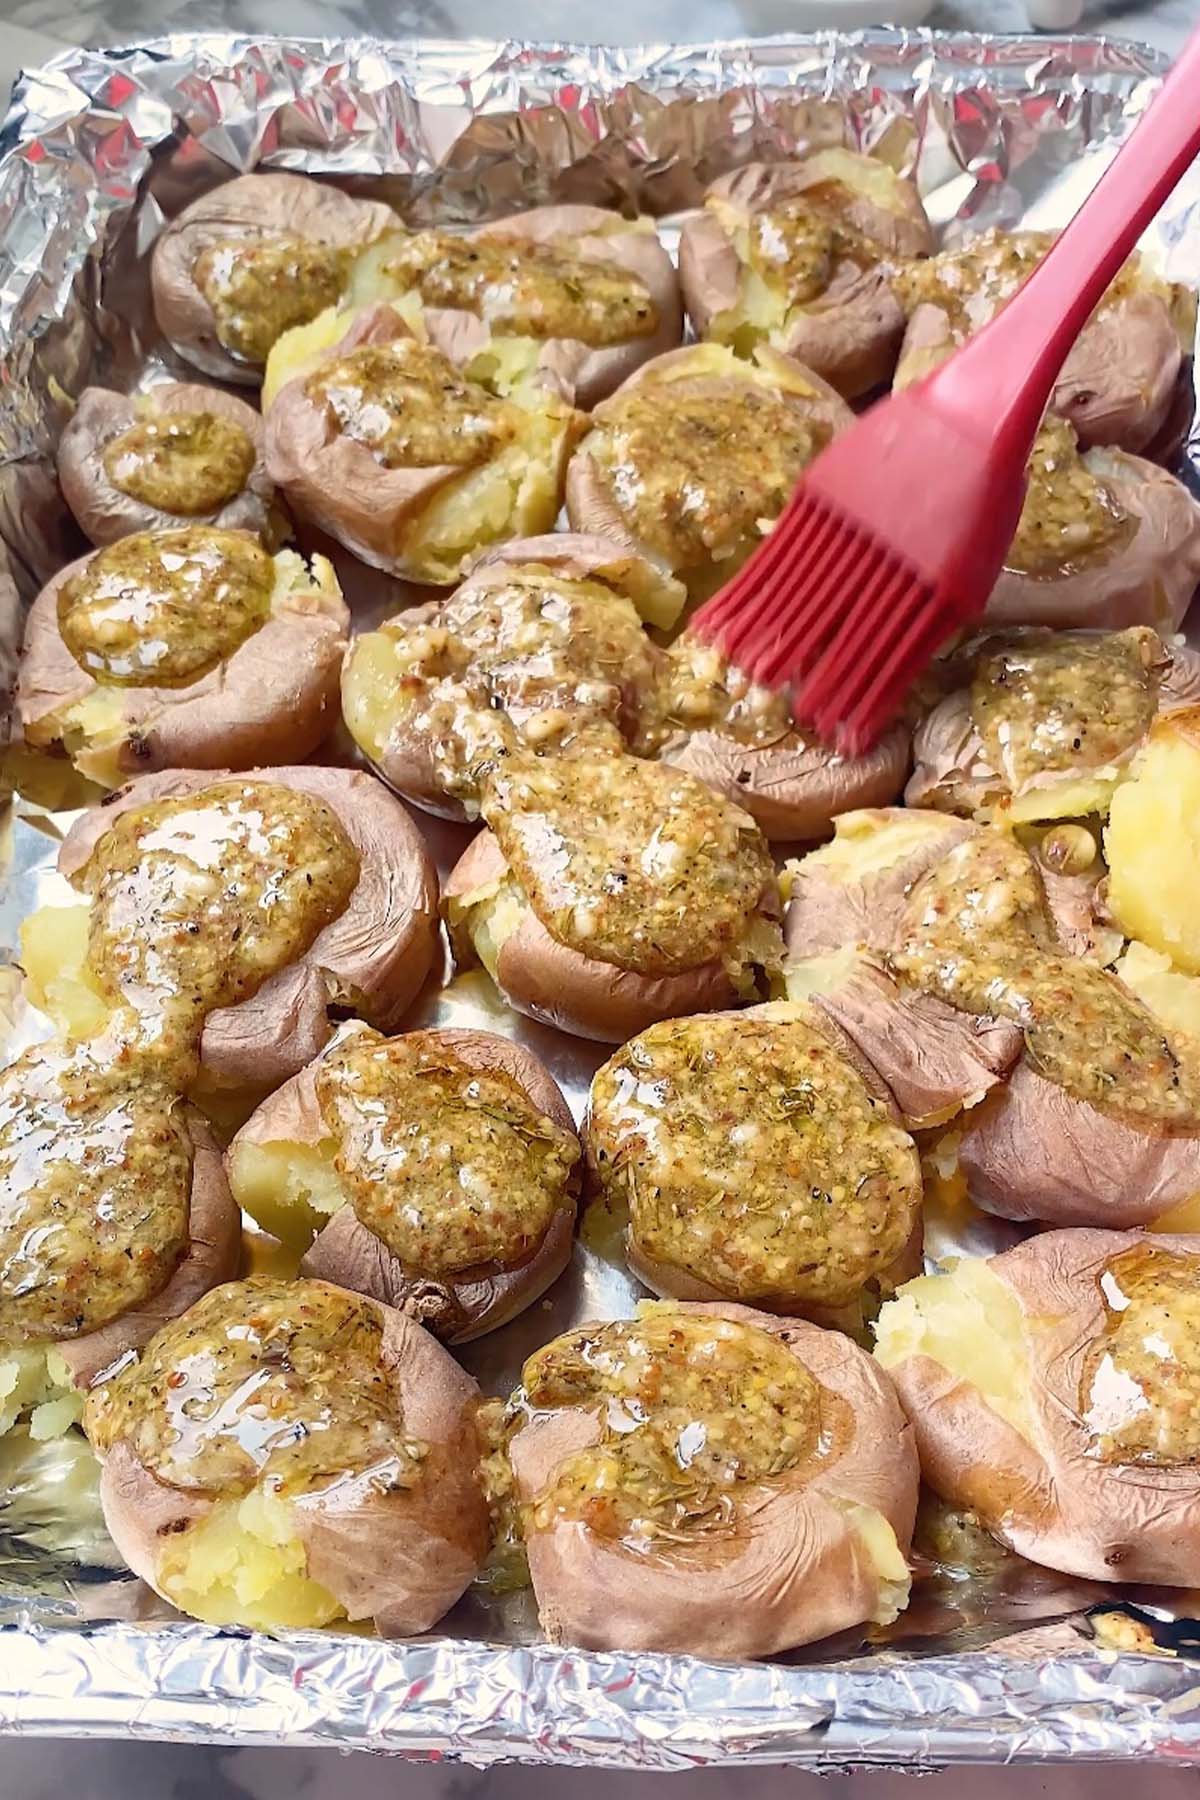 Mustard sauce is brushed on smashed baby potatoes on a foil-lined baking sheet.